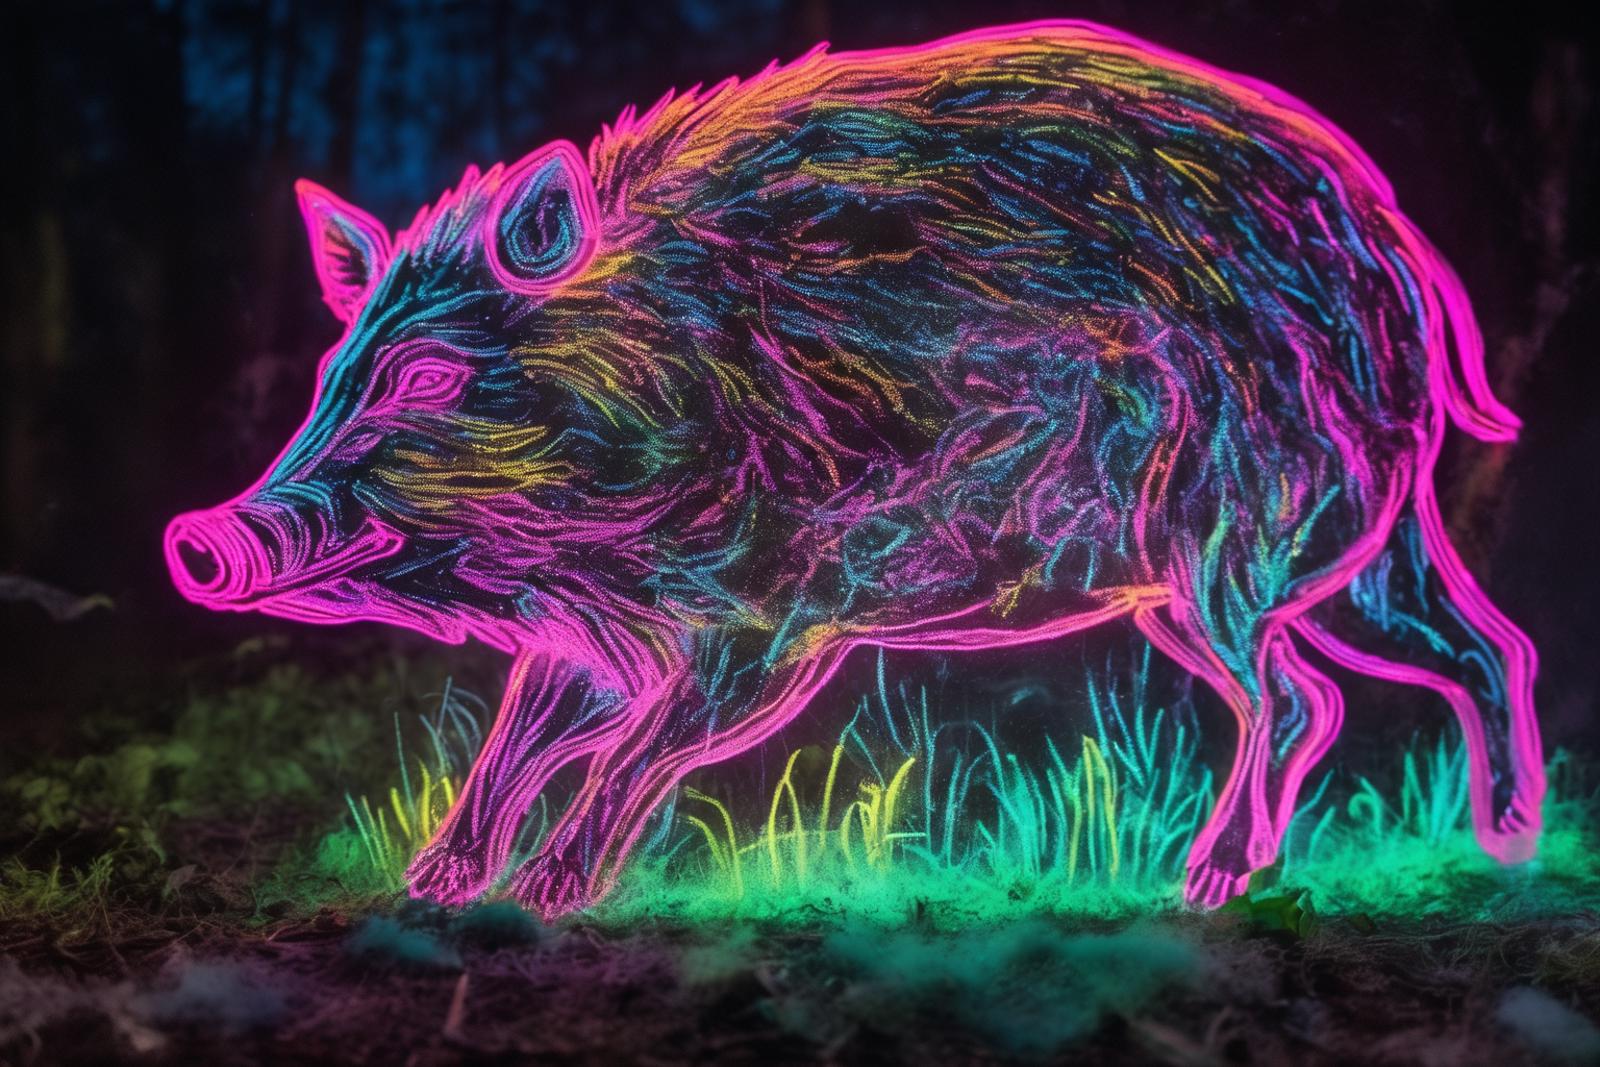 A colorful, neon-painted pig with a bushy tail and floppy ears.